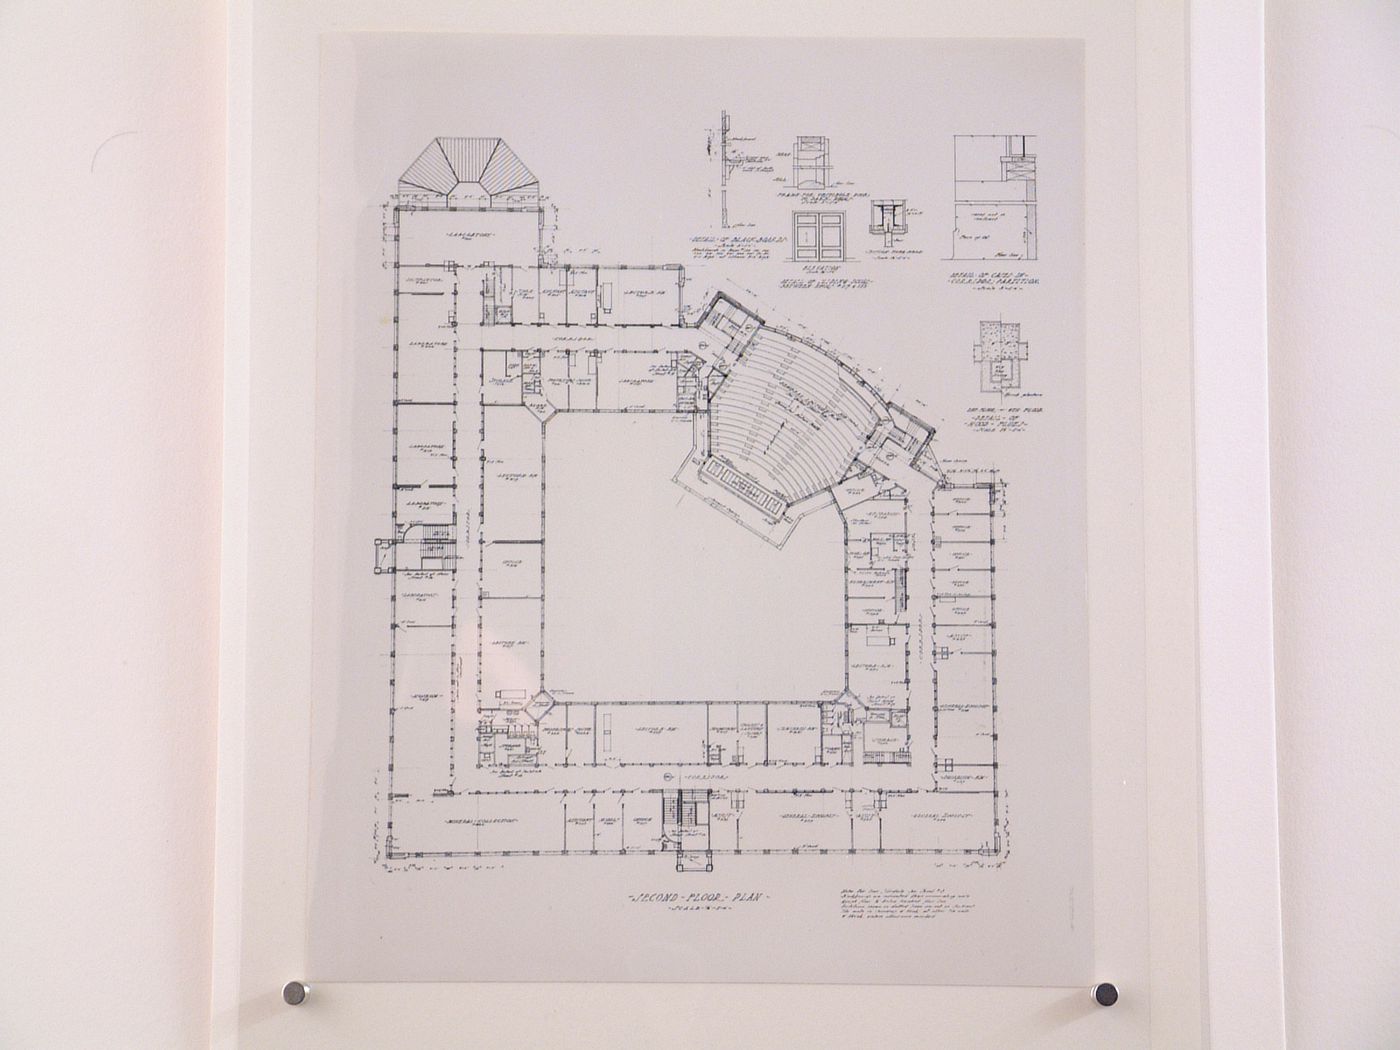 Photograph of a second floor plan and details for hood flues, corridor partitions, blackboards, doors and doorheads for the Natural Science Building (also known as the Krauss Natural Science Building), University of Michigan, Ann Arbor, Michigan